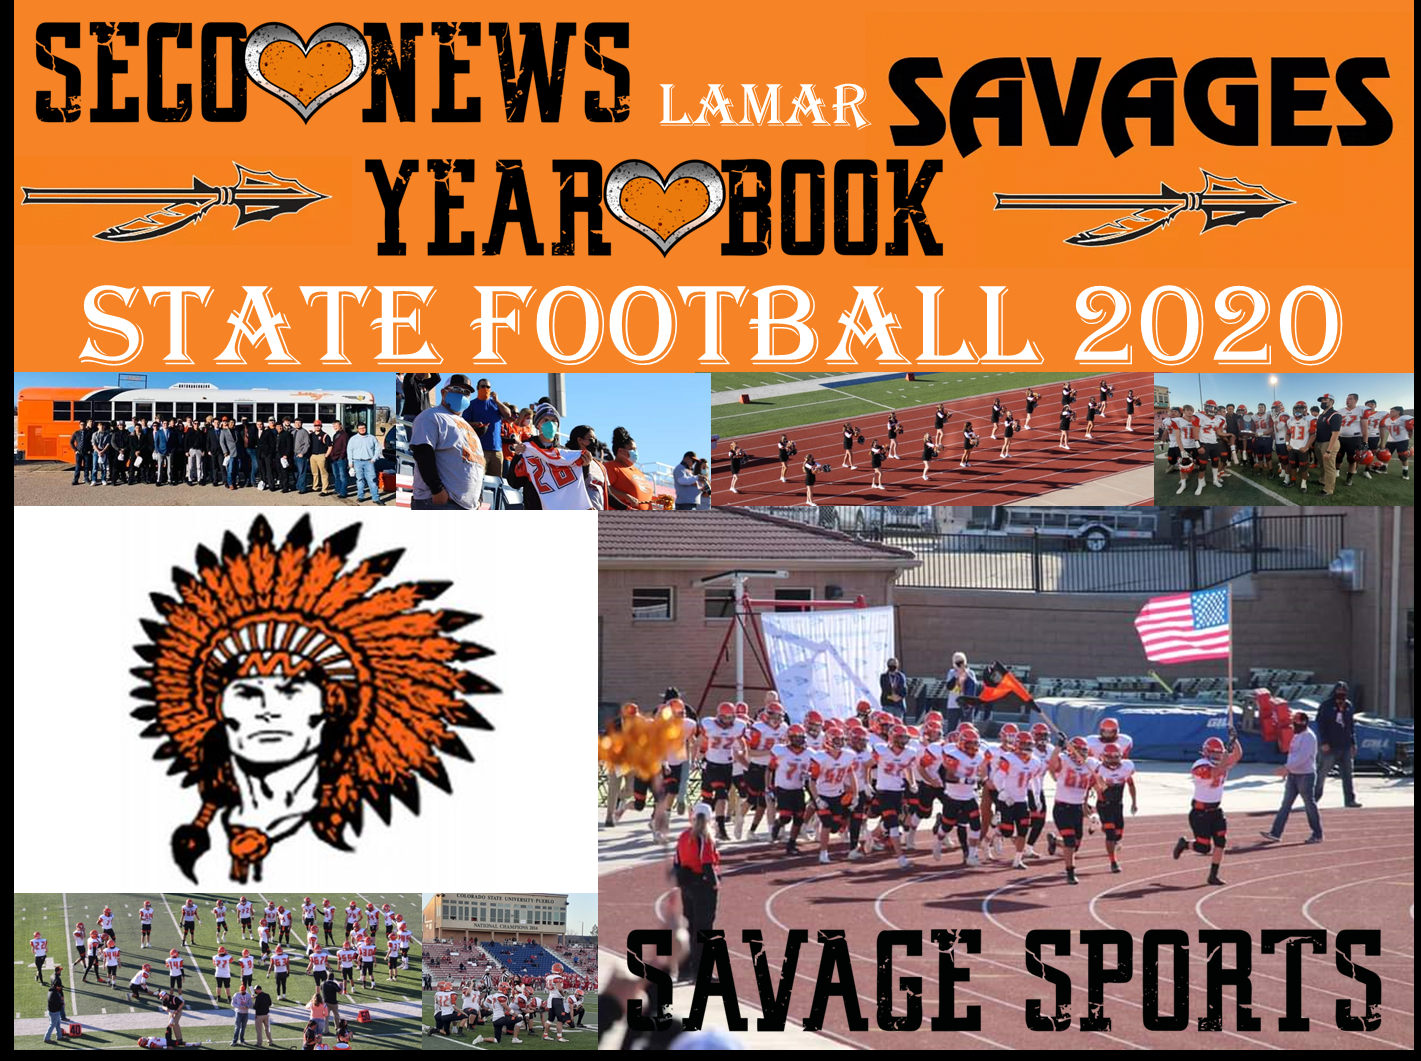 Lamar Savages State Football YEARBOOK page cover image seconews.org 